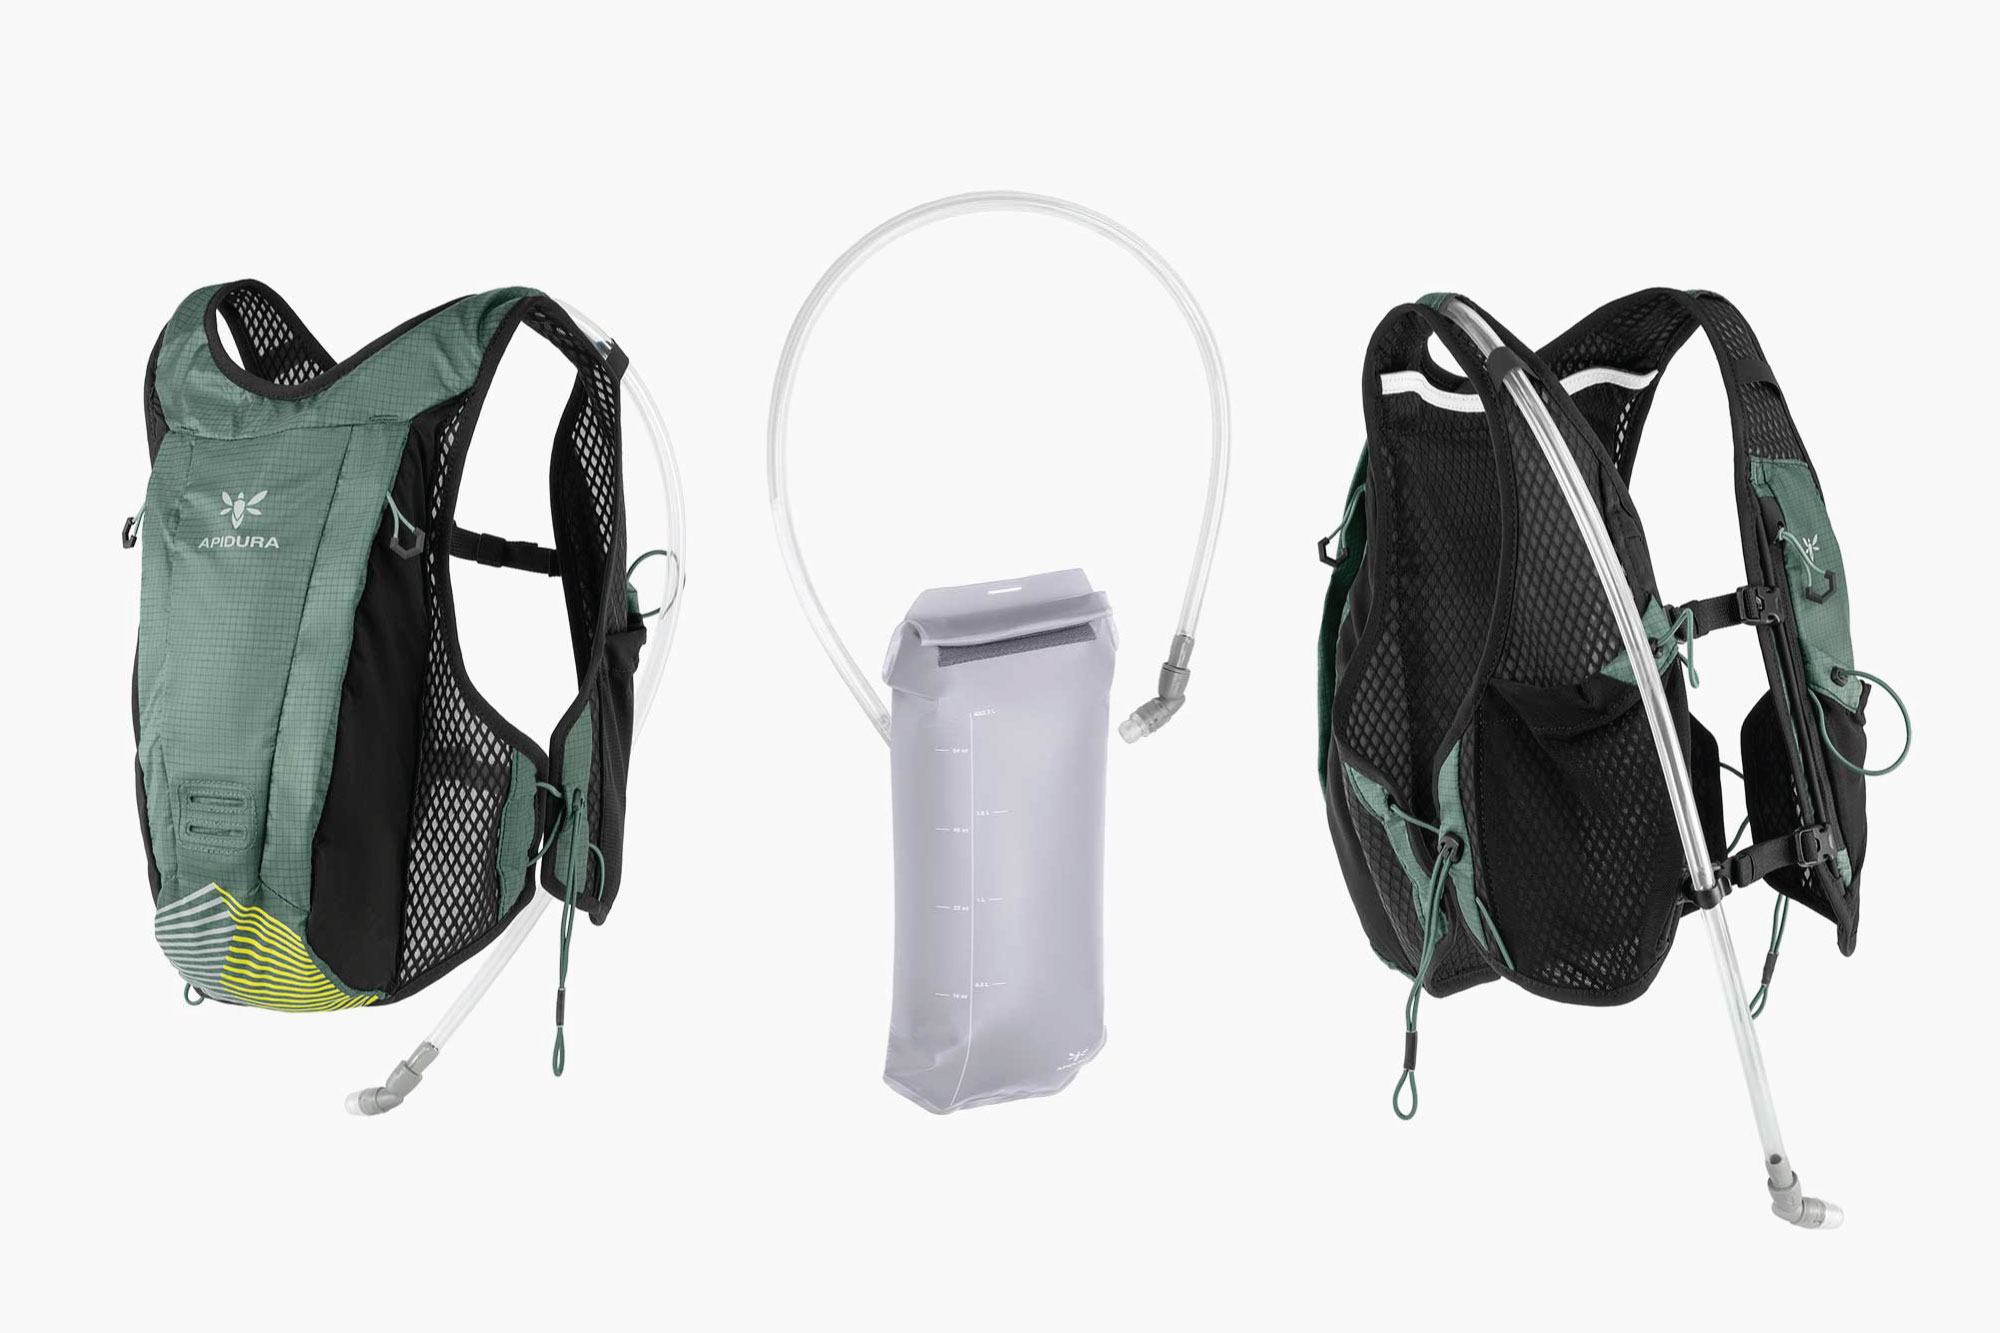 Apidura's Gravel and Bikepacking-specific Racing Hydration Vest